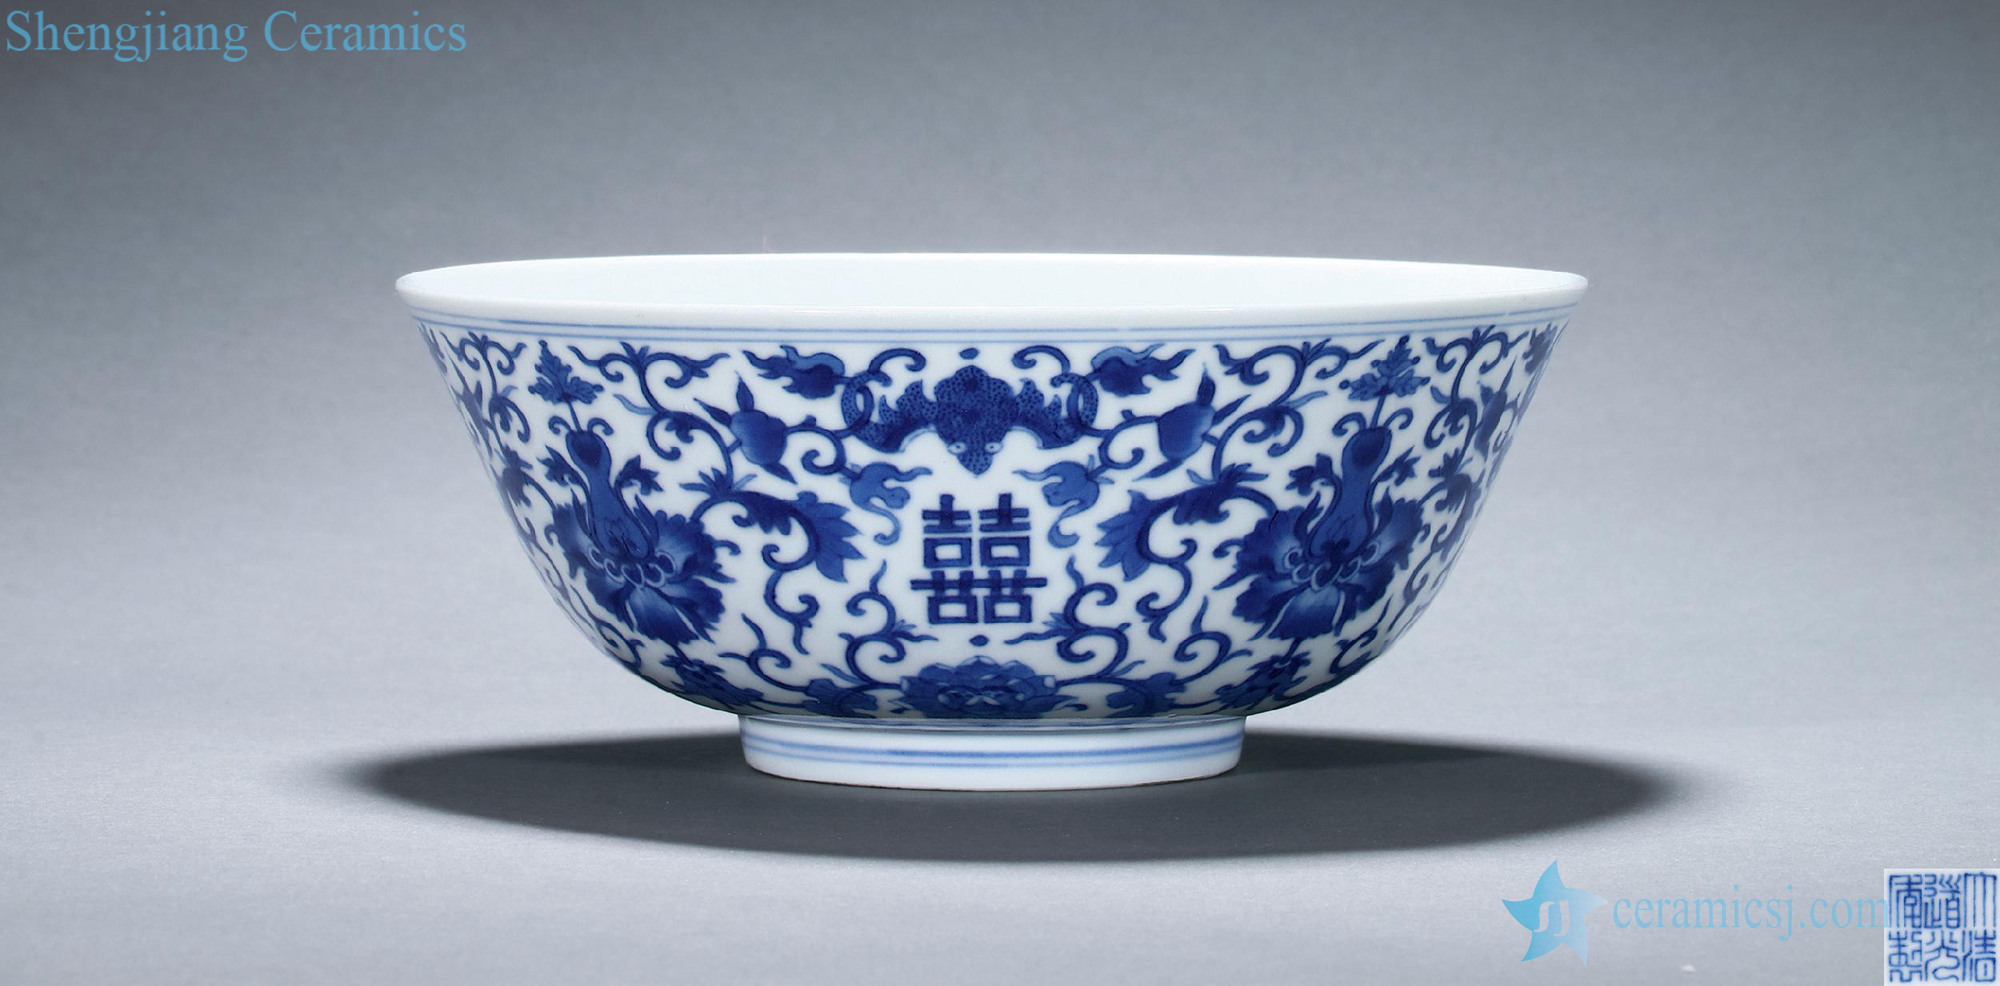 Qing daoguang Blue and white live happy character bowl